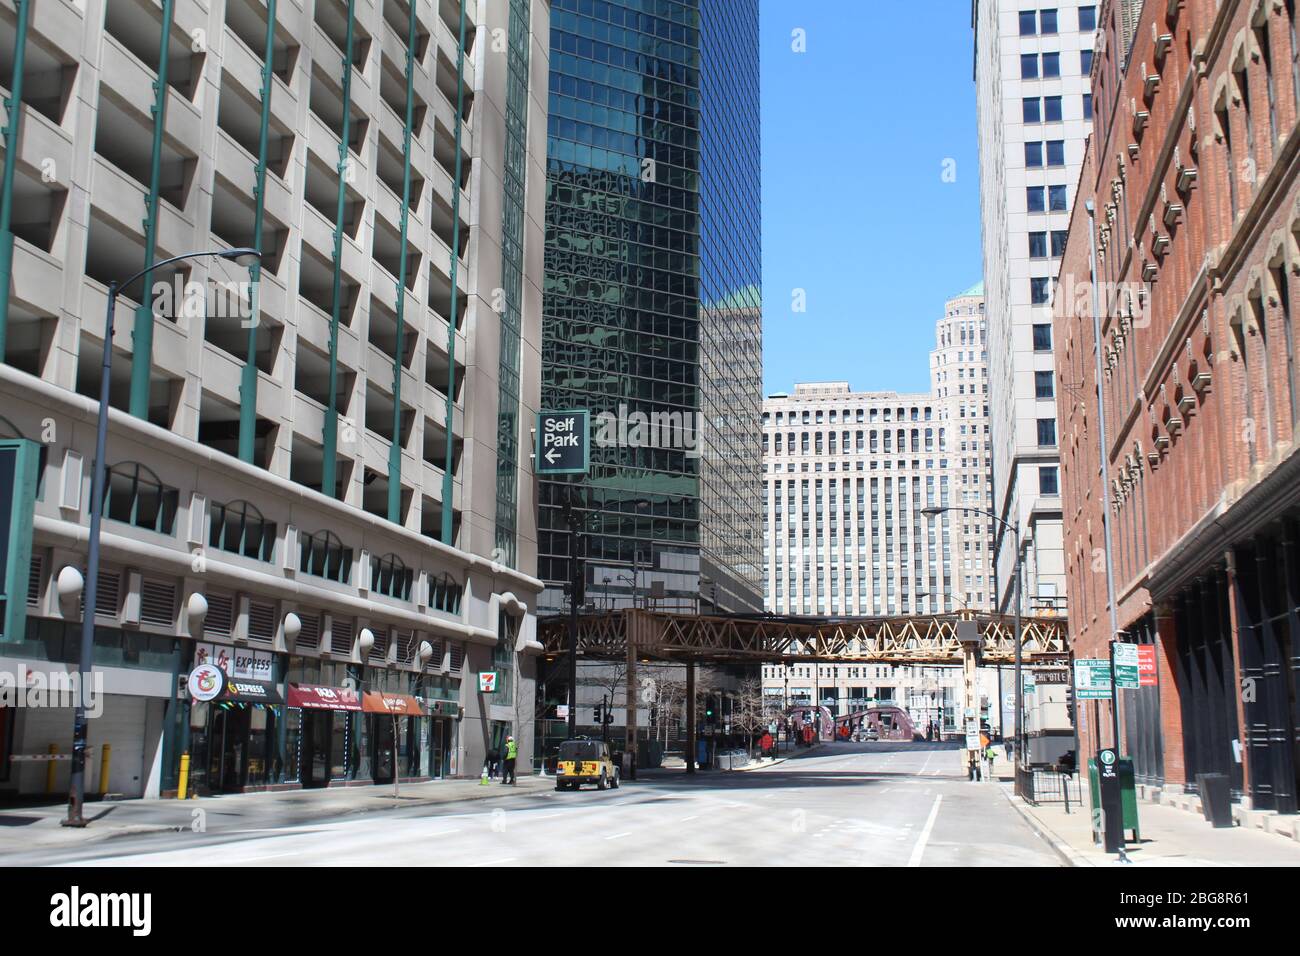 Nearly vacant Franklin Street in Chicago during the coronavirus shelter-in-place order Stock Photo